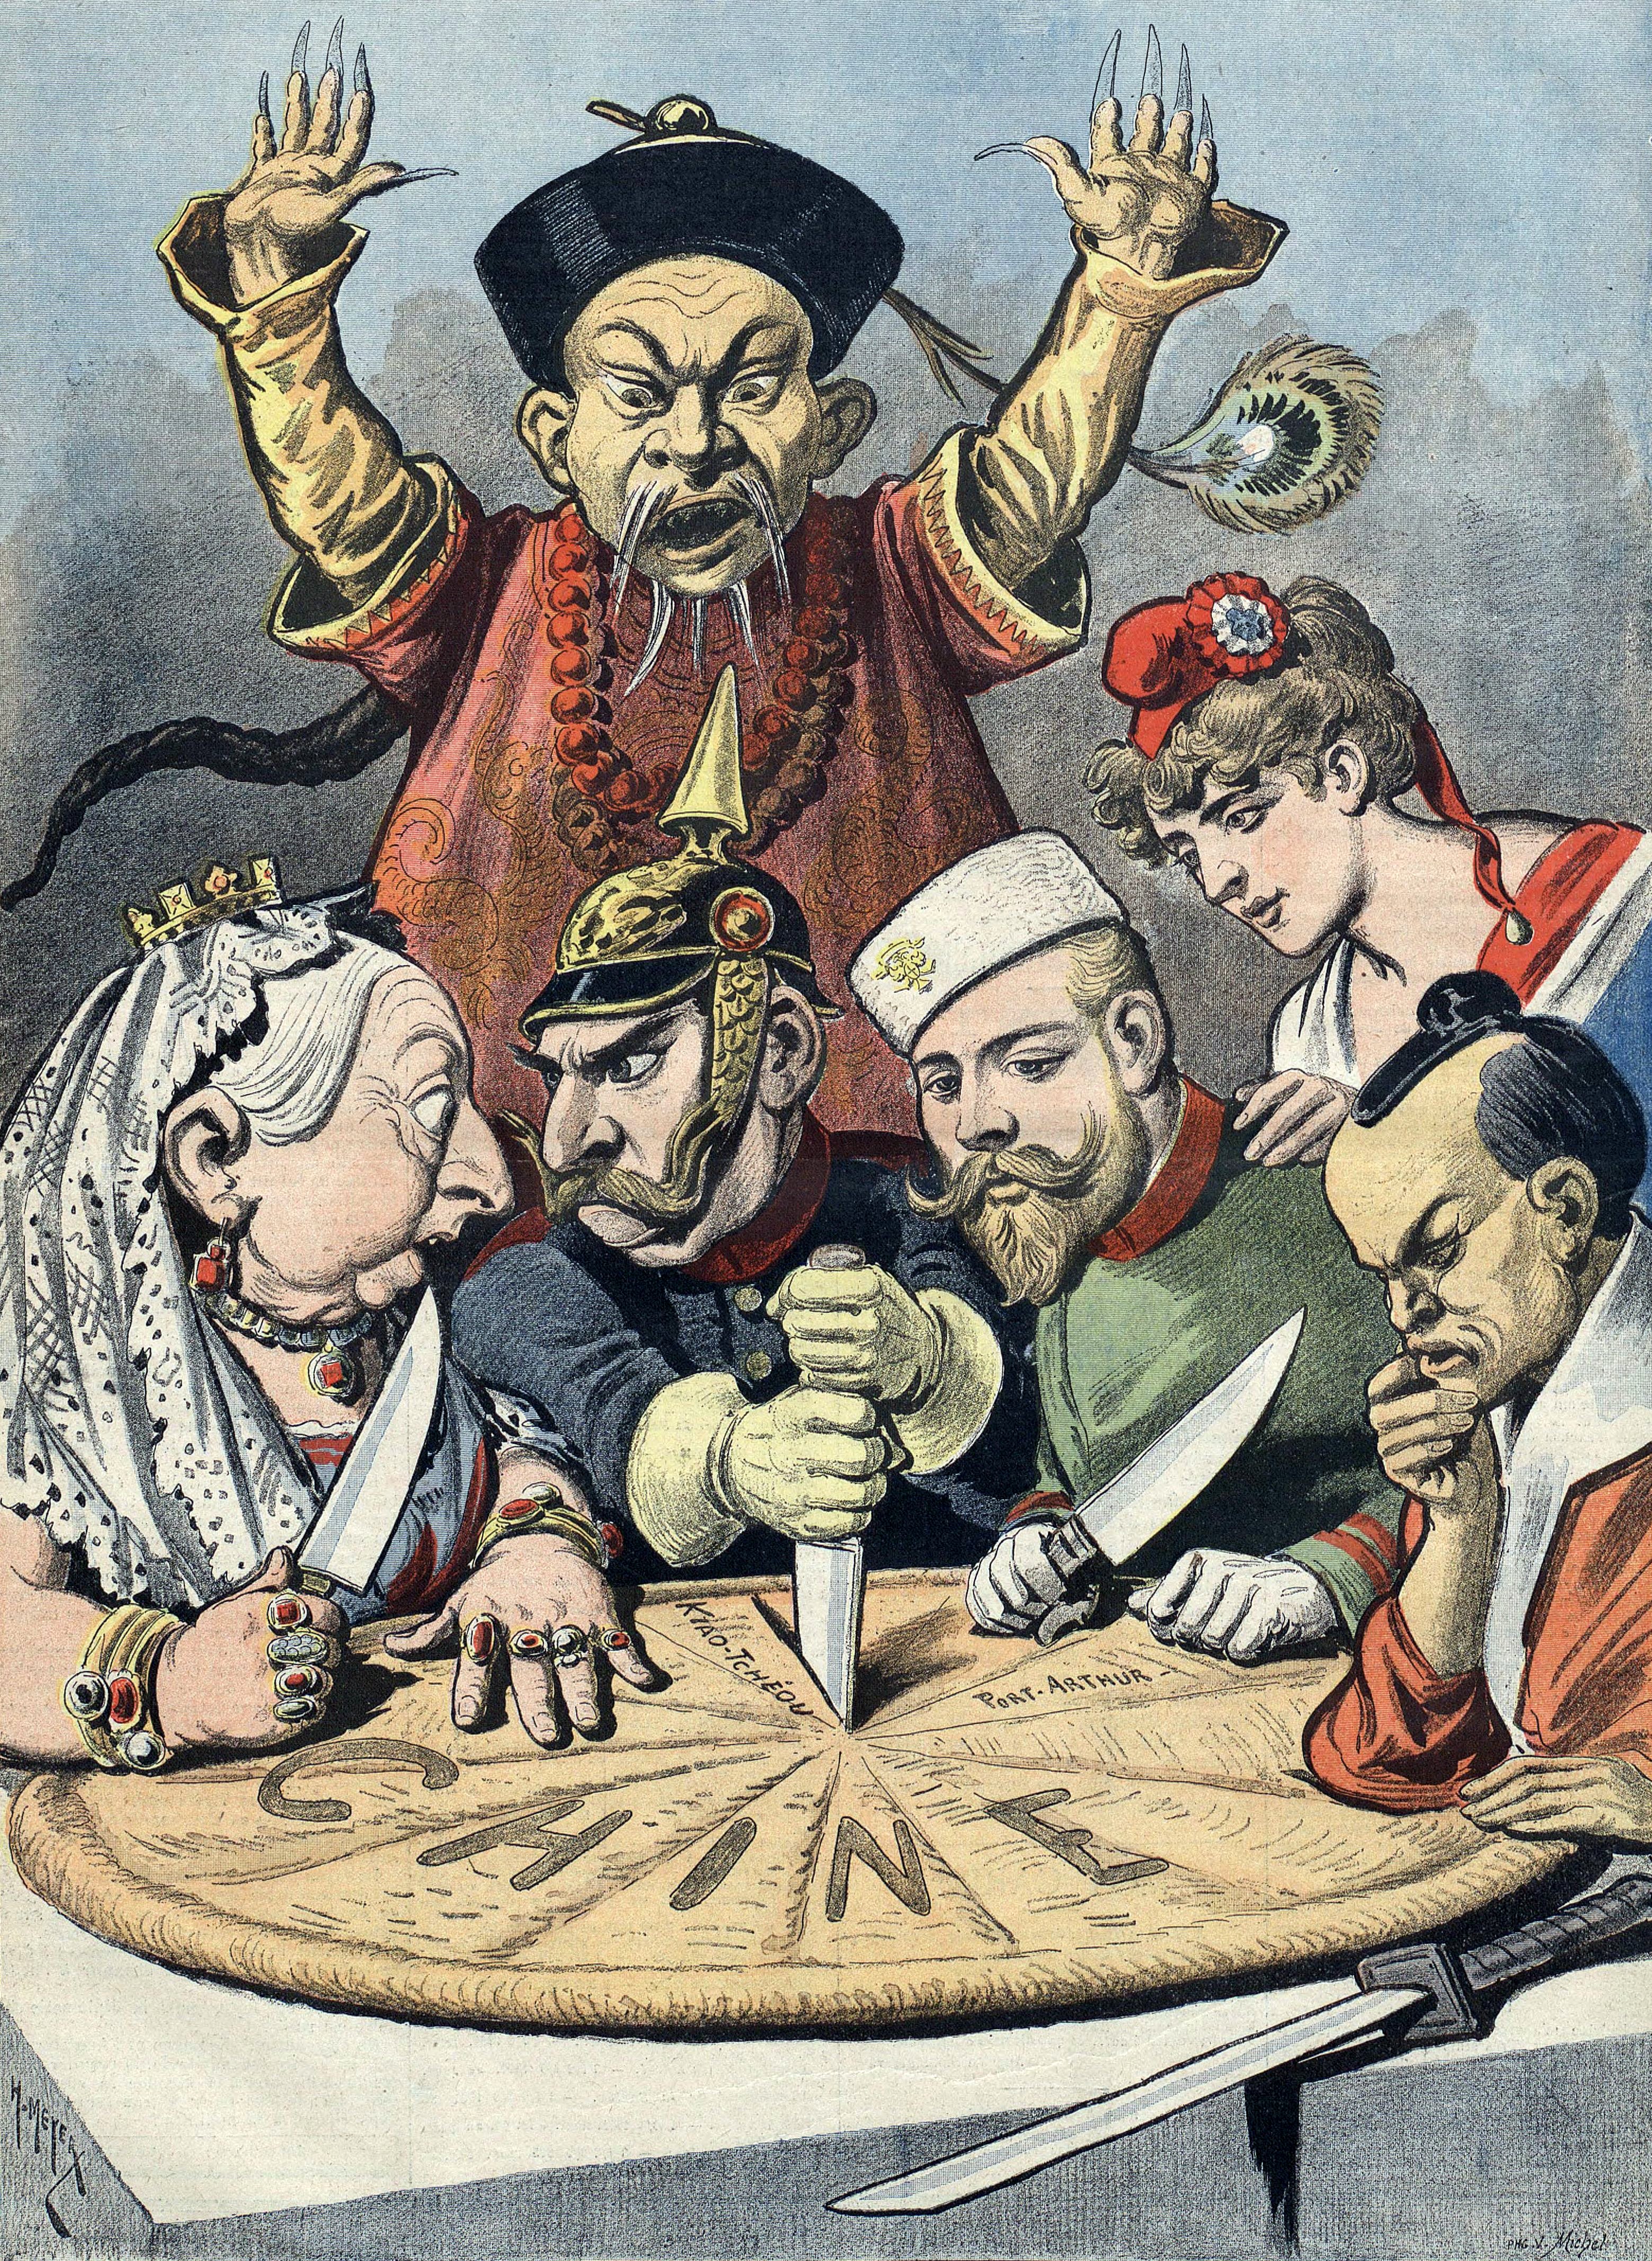 "China-the Cake of Kings (1898 French Political Cartoon)